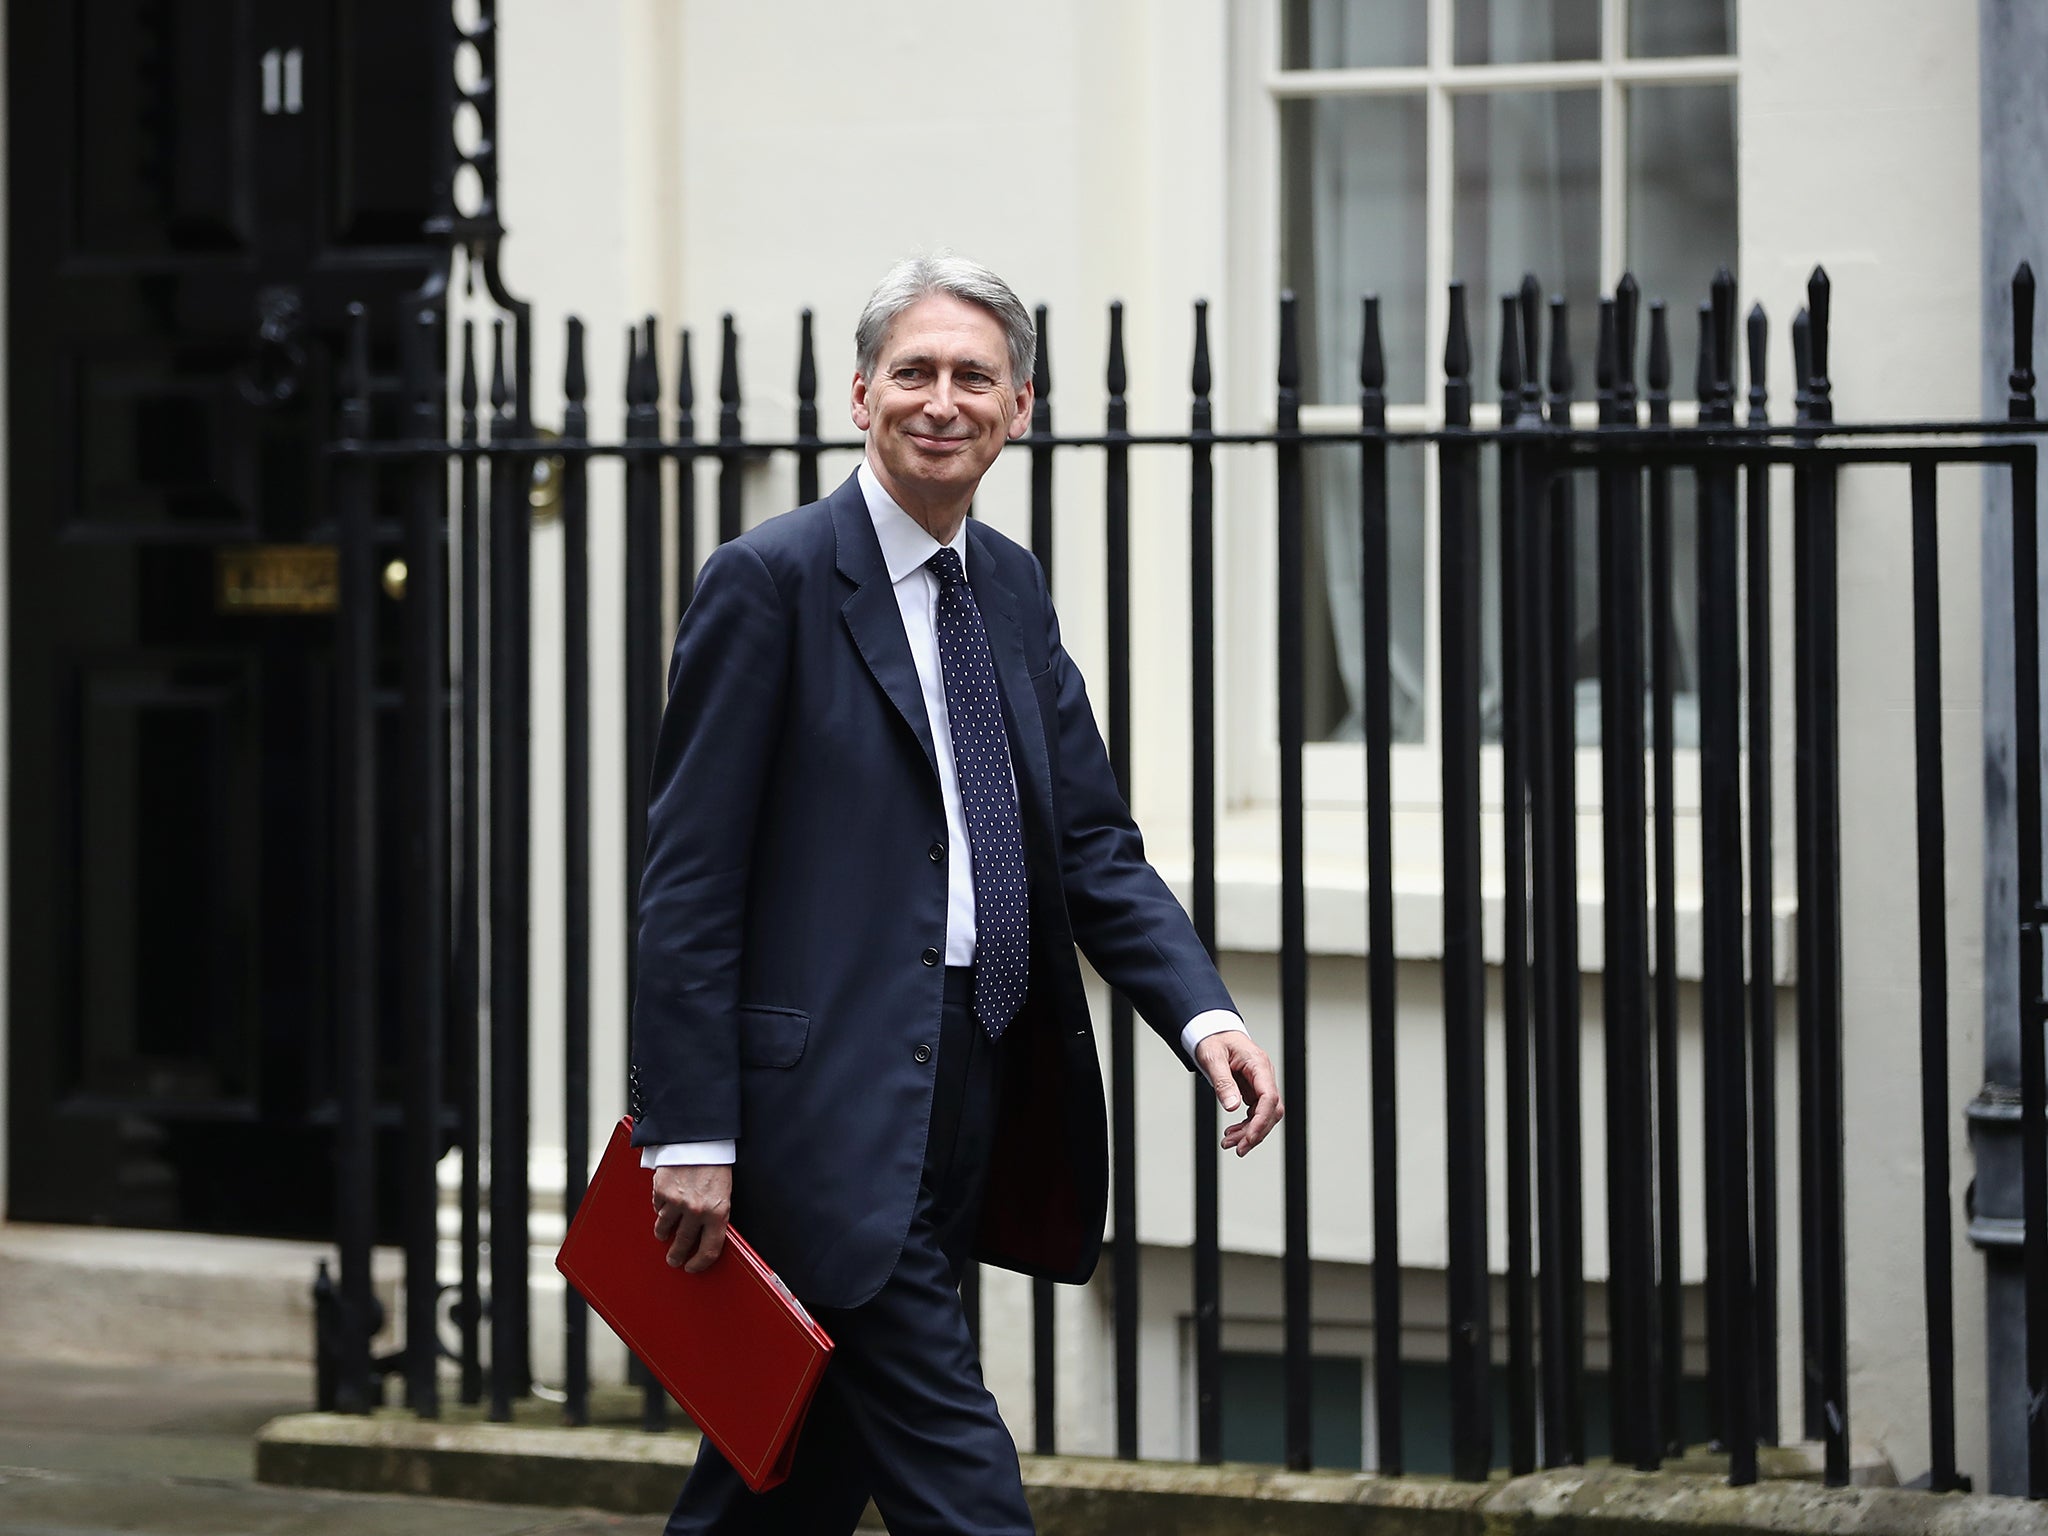 Chancellor Philip Hammond is to present his first budget statement in November, setting out how the government will use tax and spending plans to shore up the UK economy after the vote to leave the EU